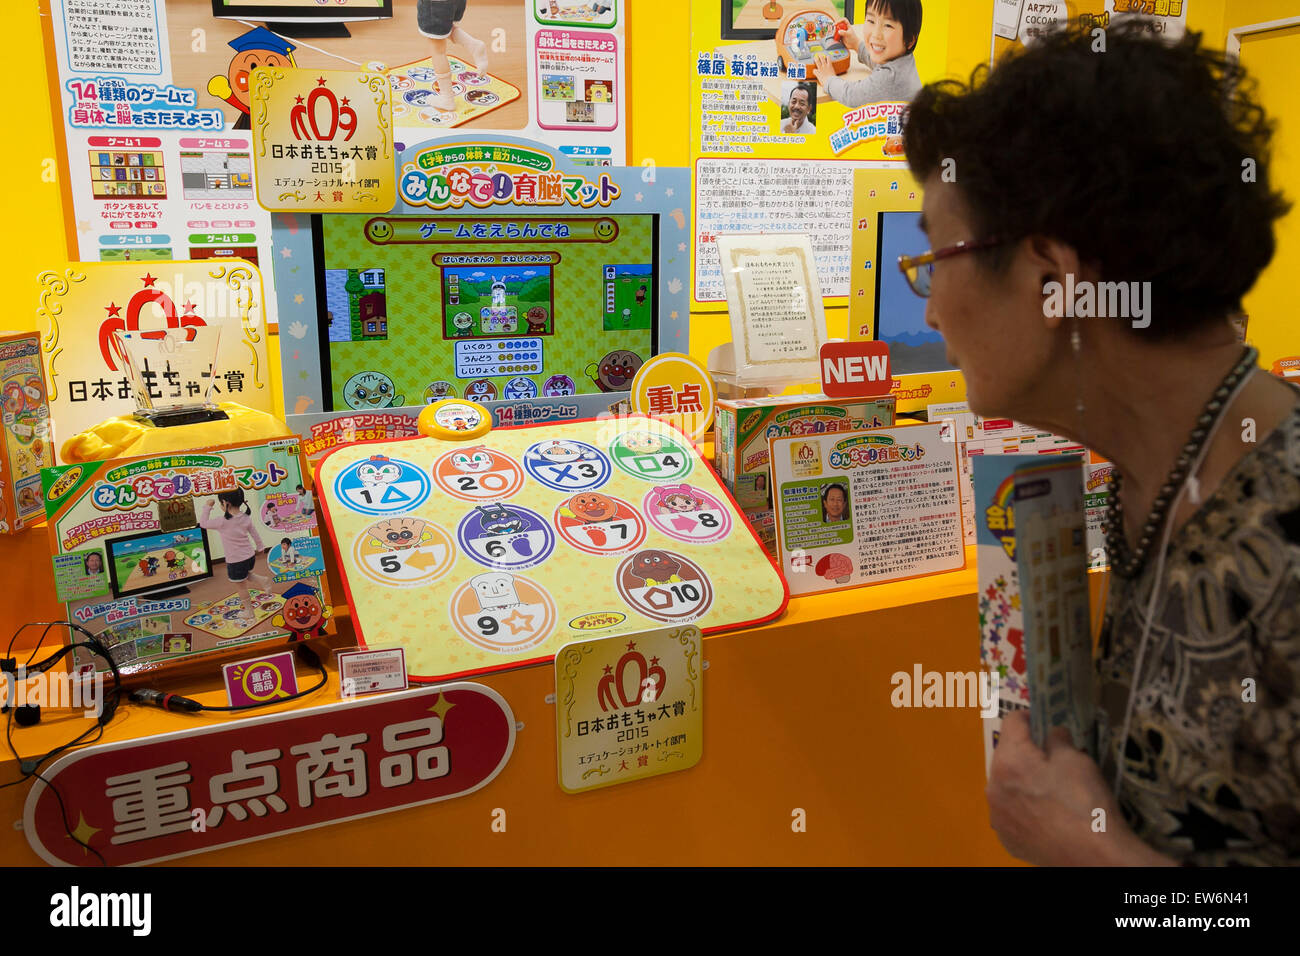 A woman looks at the products of JoyPalette Co., LTD. during the International Tokyo Toy Show 2015 in Tokyo Big Sight on June 18, 2015, Tokyo, Japan. Japan's largest trade show for toy makers attracts buyers and collectors by introducing the latest products from different toymakers from Japan and overseas. The toy fair showcases about 35,000 toys from 149 domestic and foreign companies and is held over four days. © Rodrigo Reyes Marin/AFLO/Alamy Live News Stock Photo